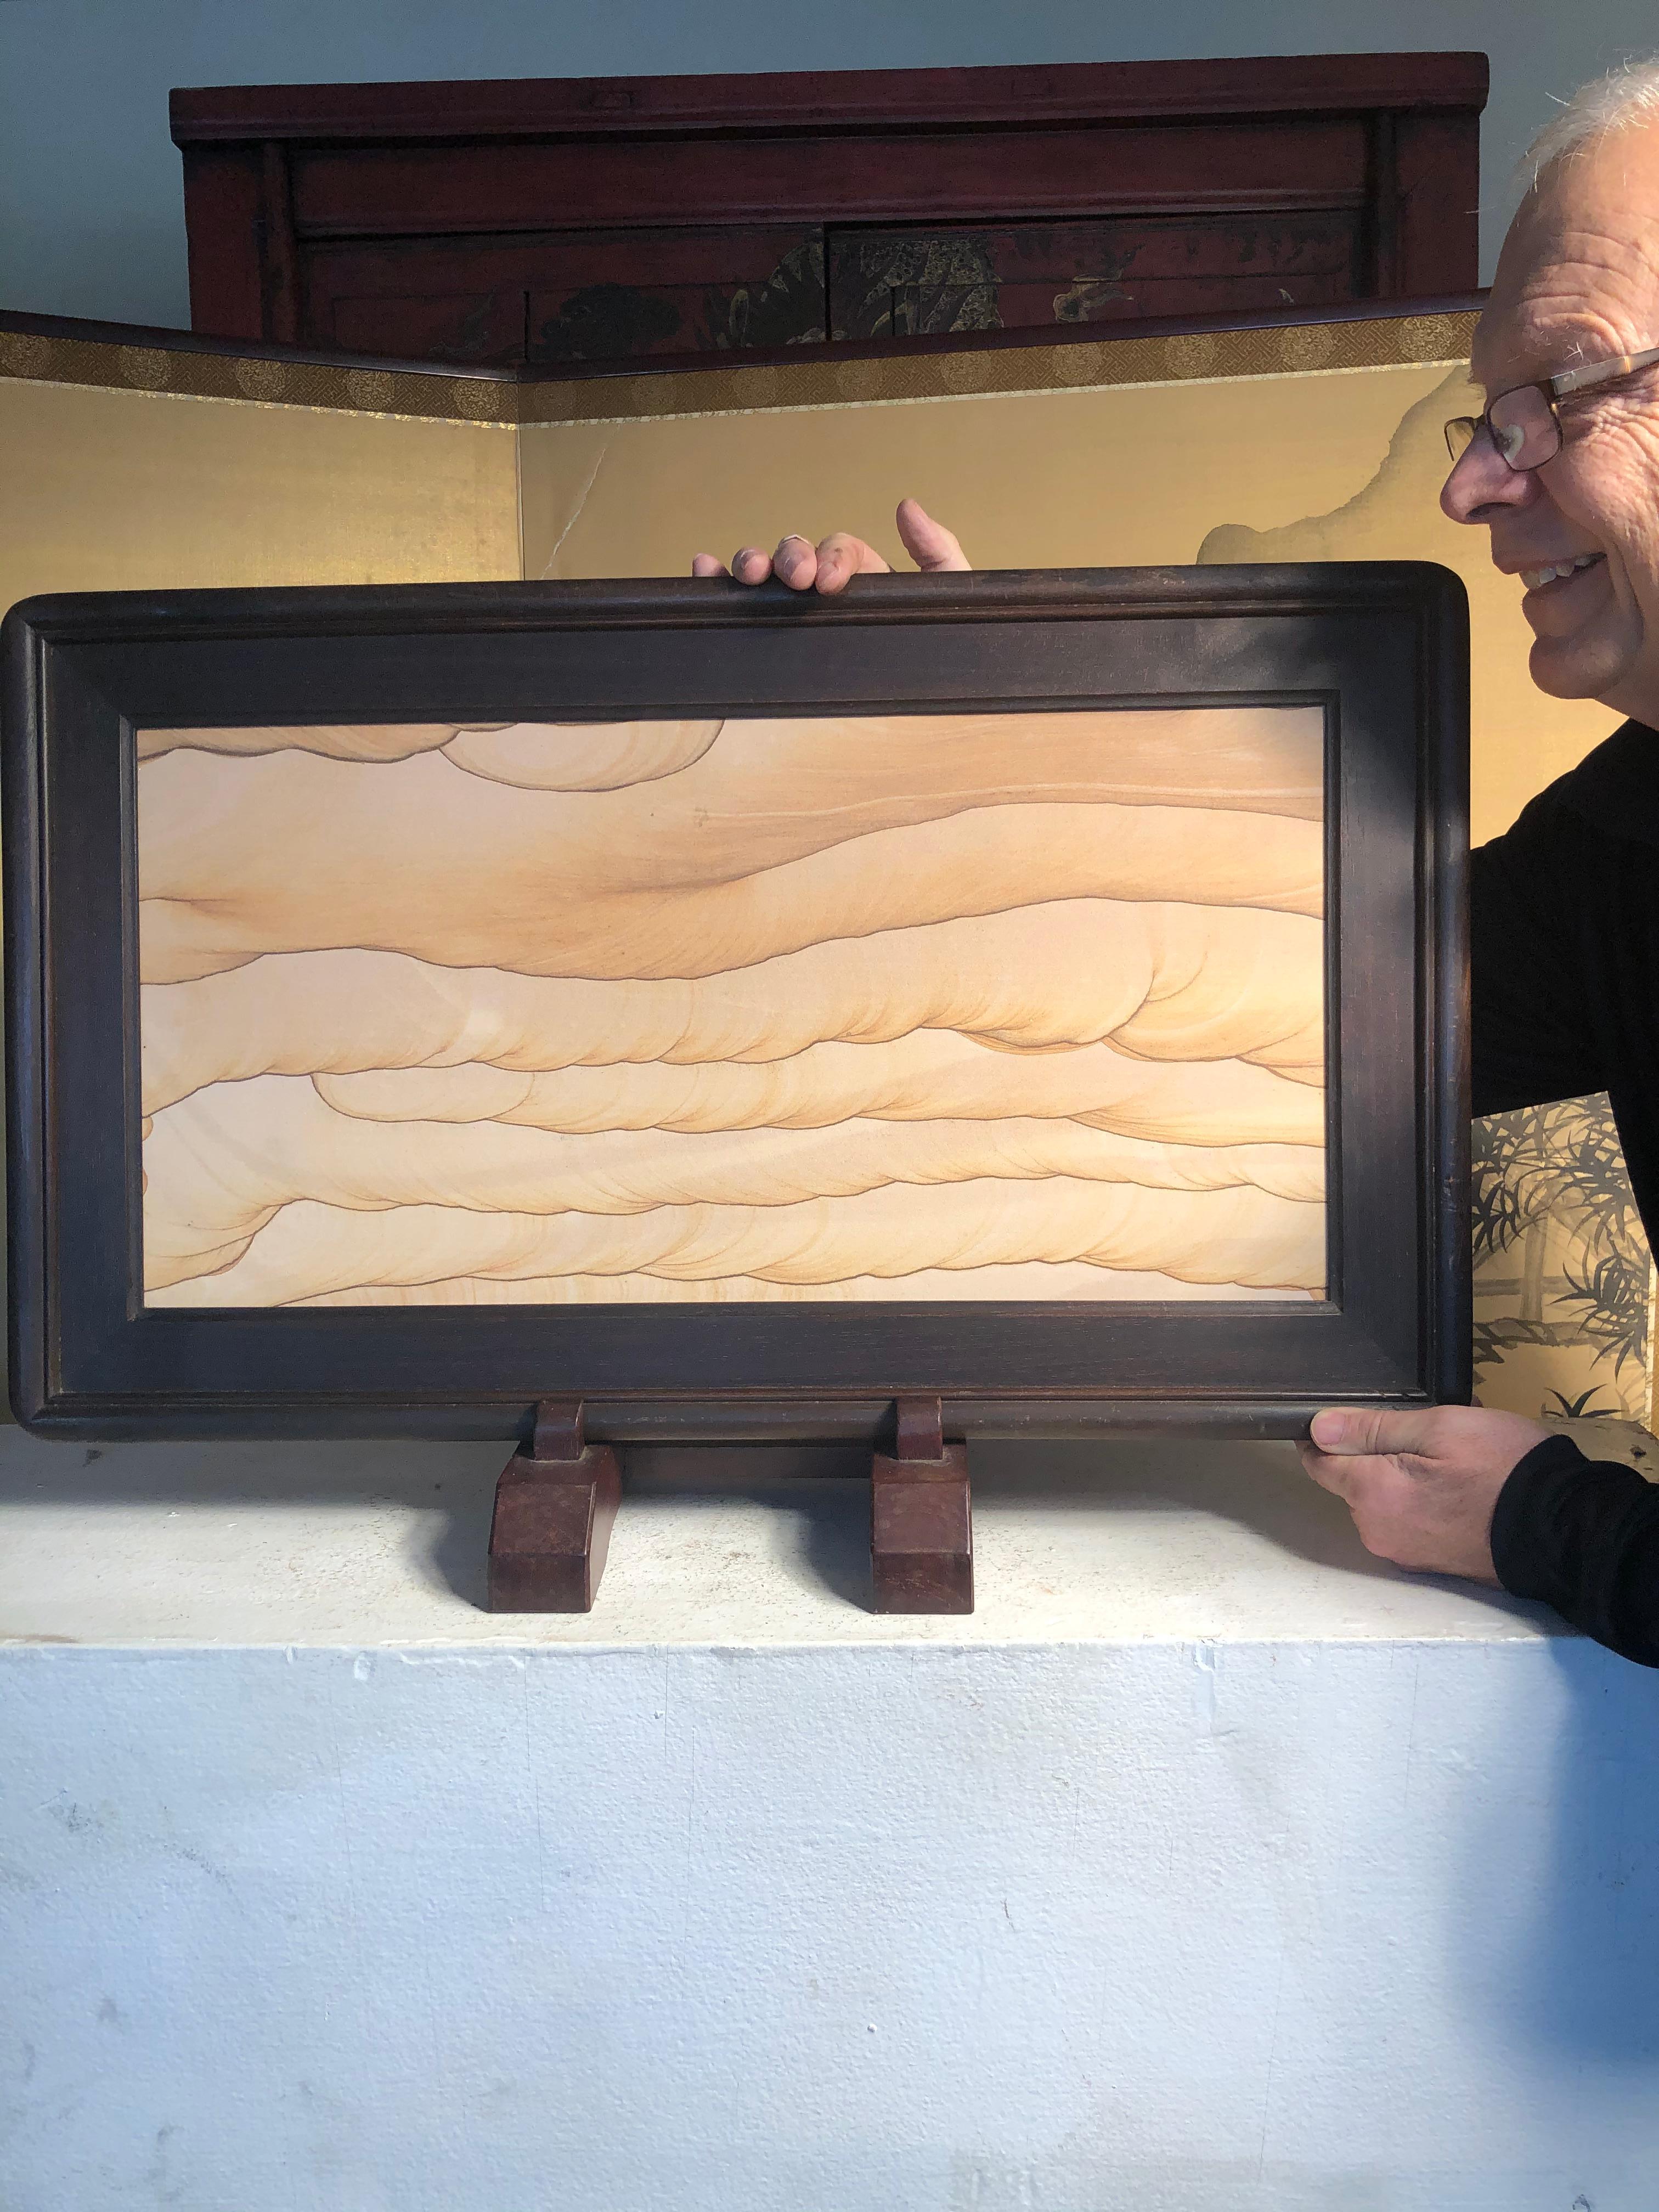 Extraordinary Natural work, one of a kind

Framed in our own custom 